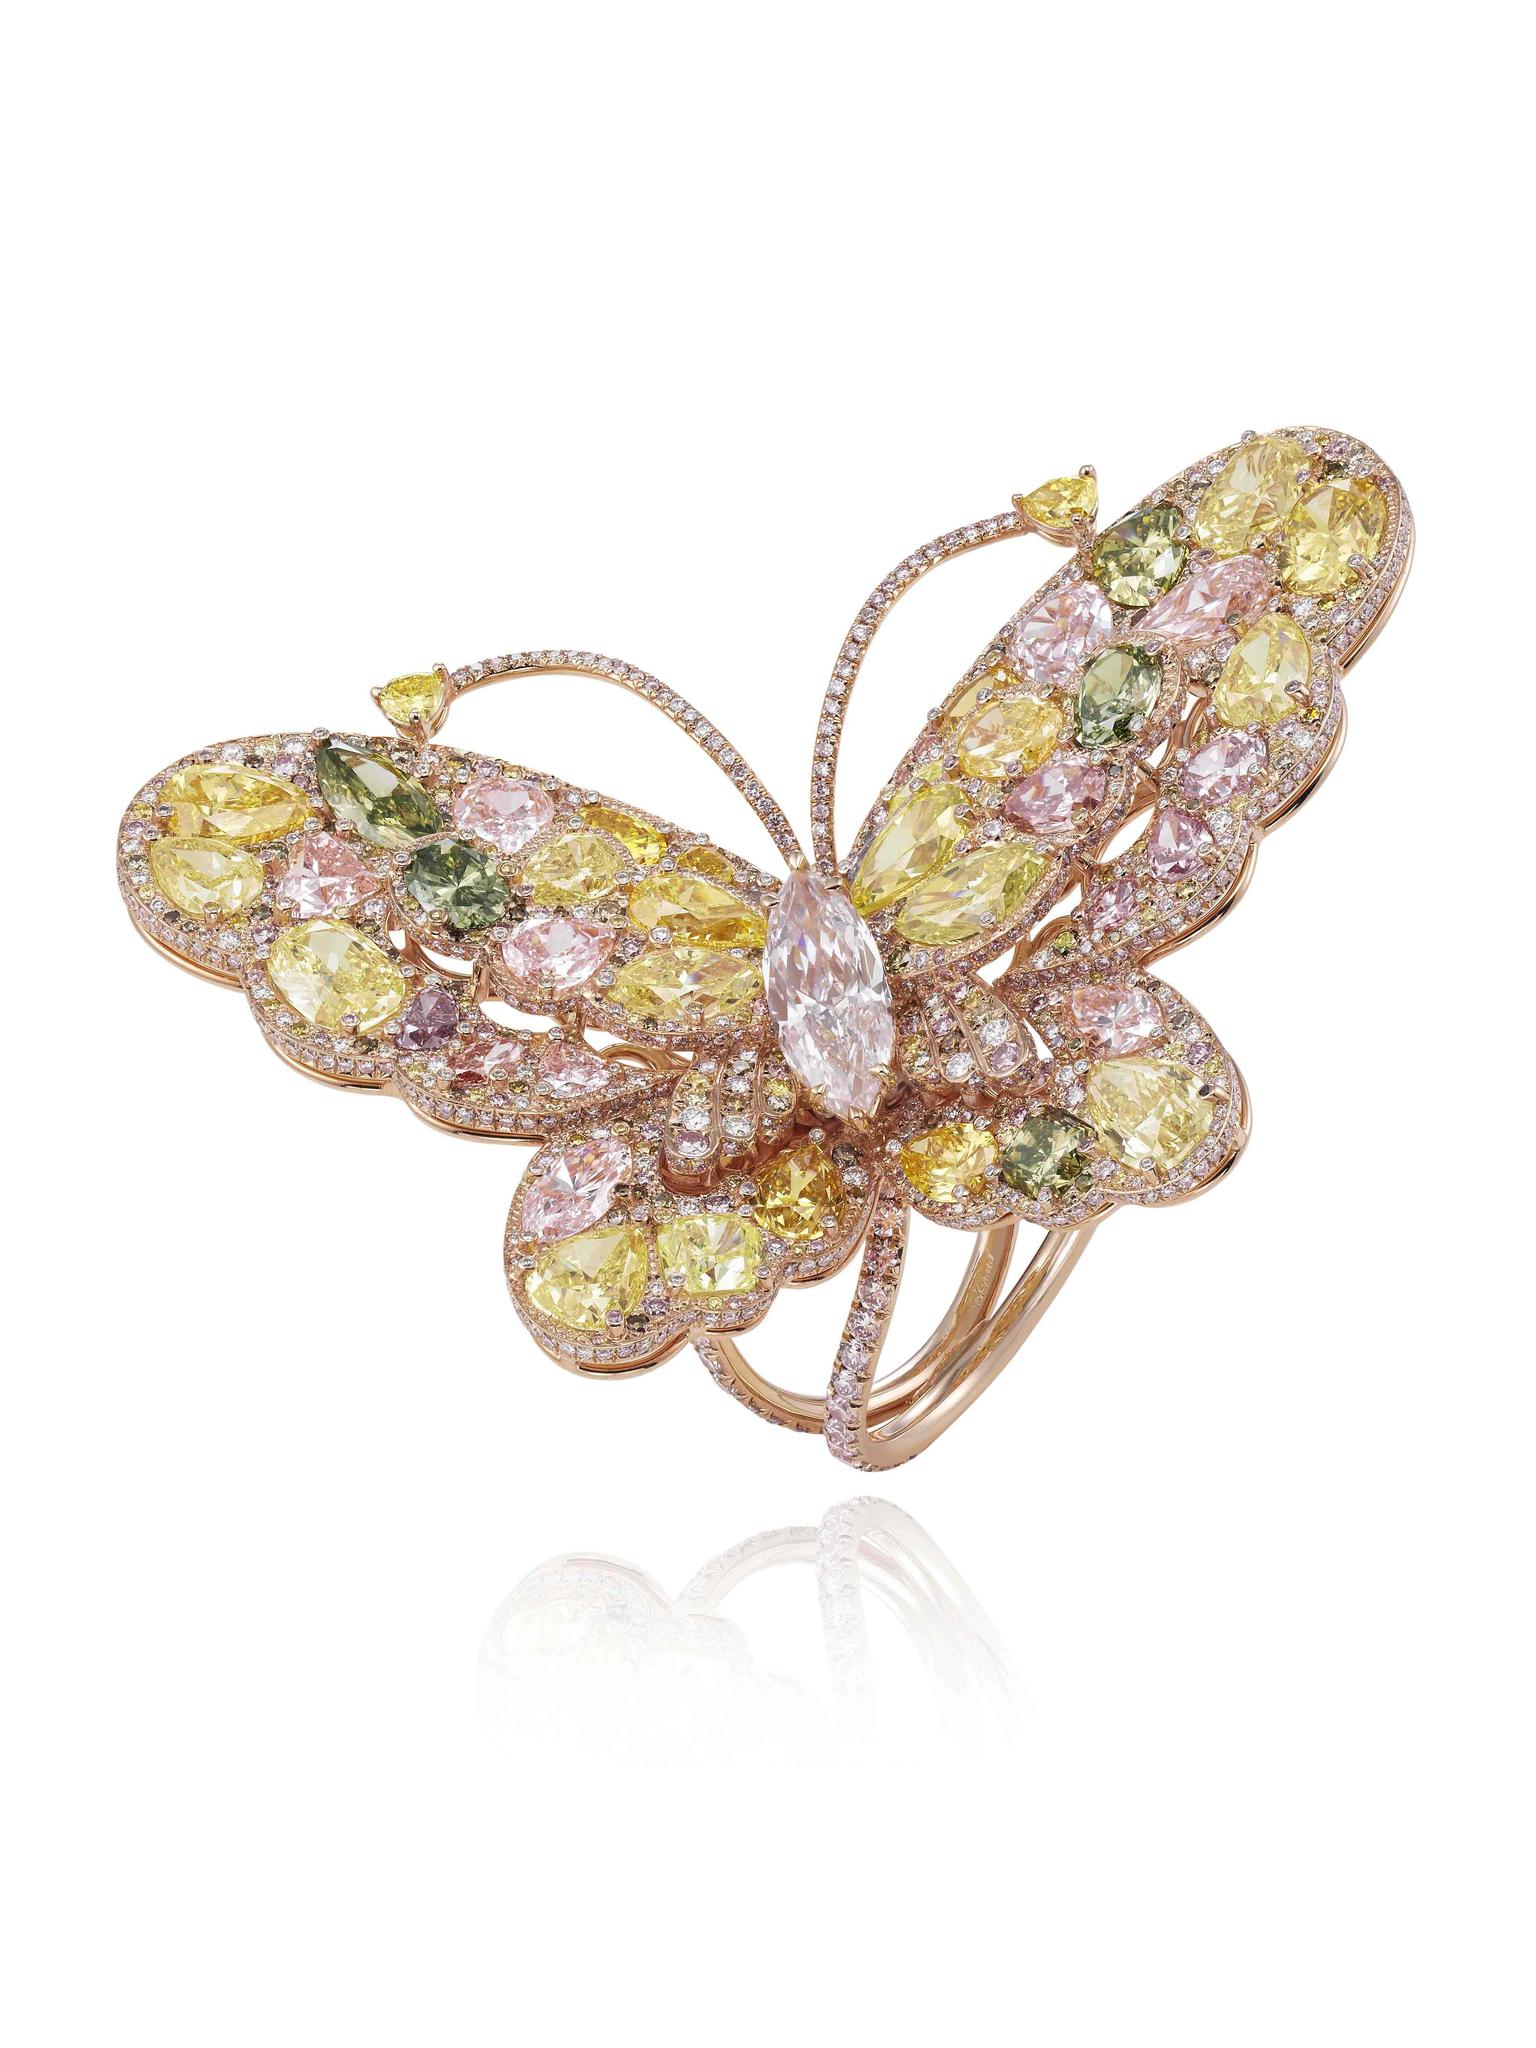 Chopard Red Carpet Collection 2014 Butterfly ring